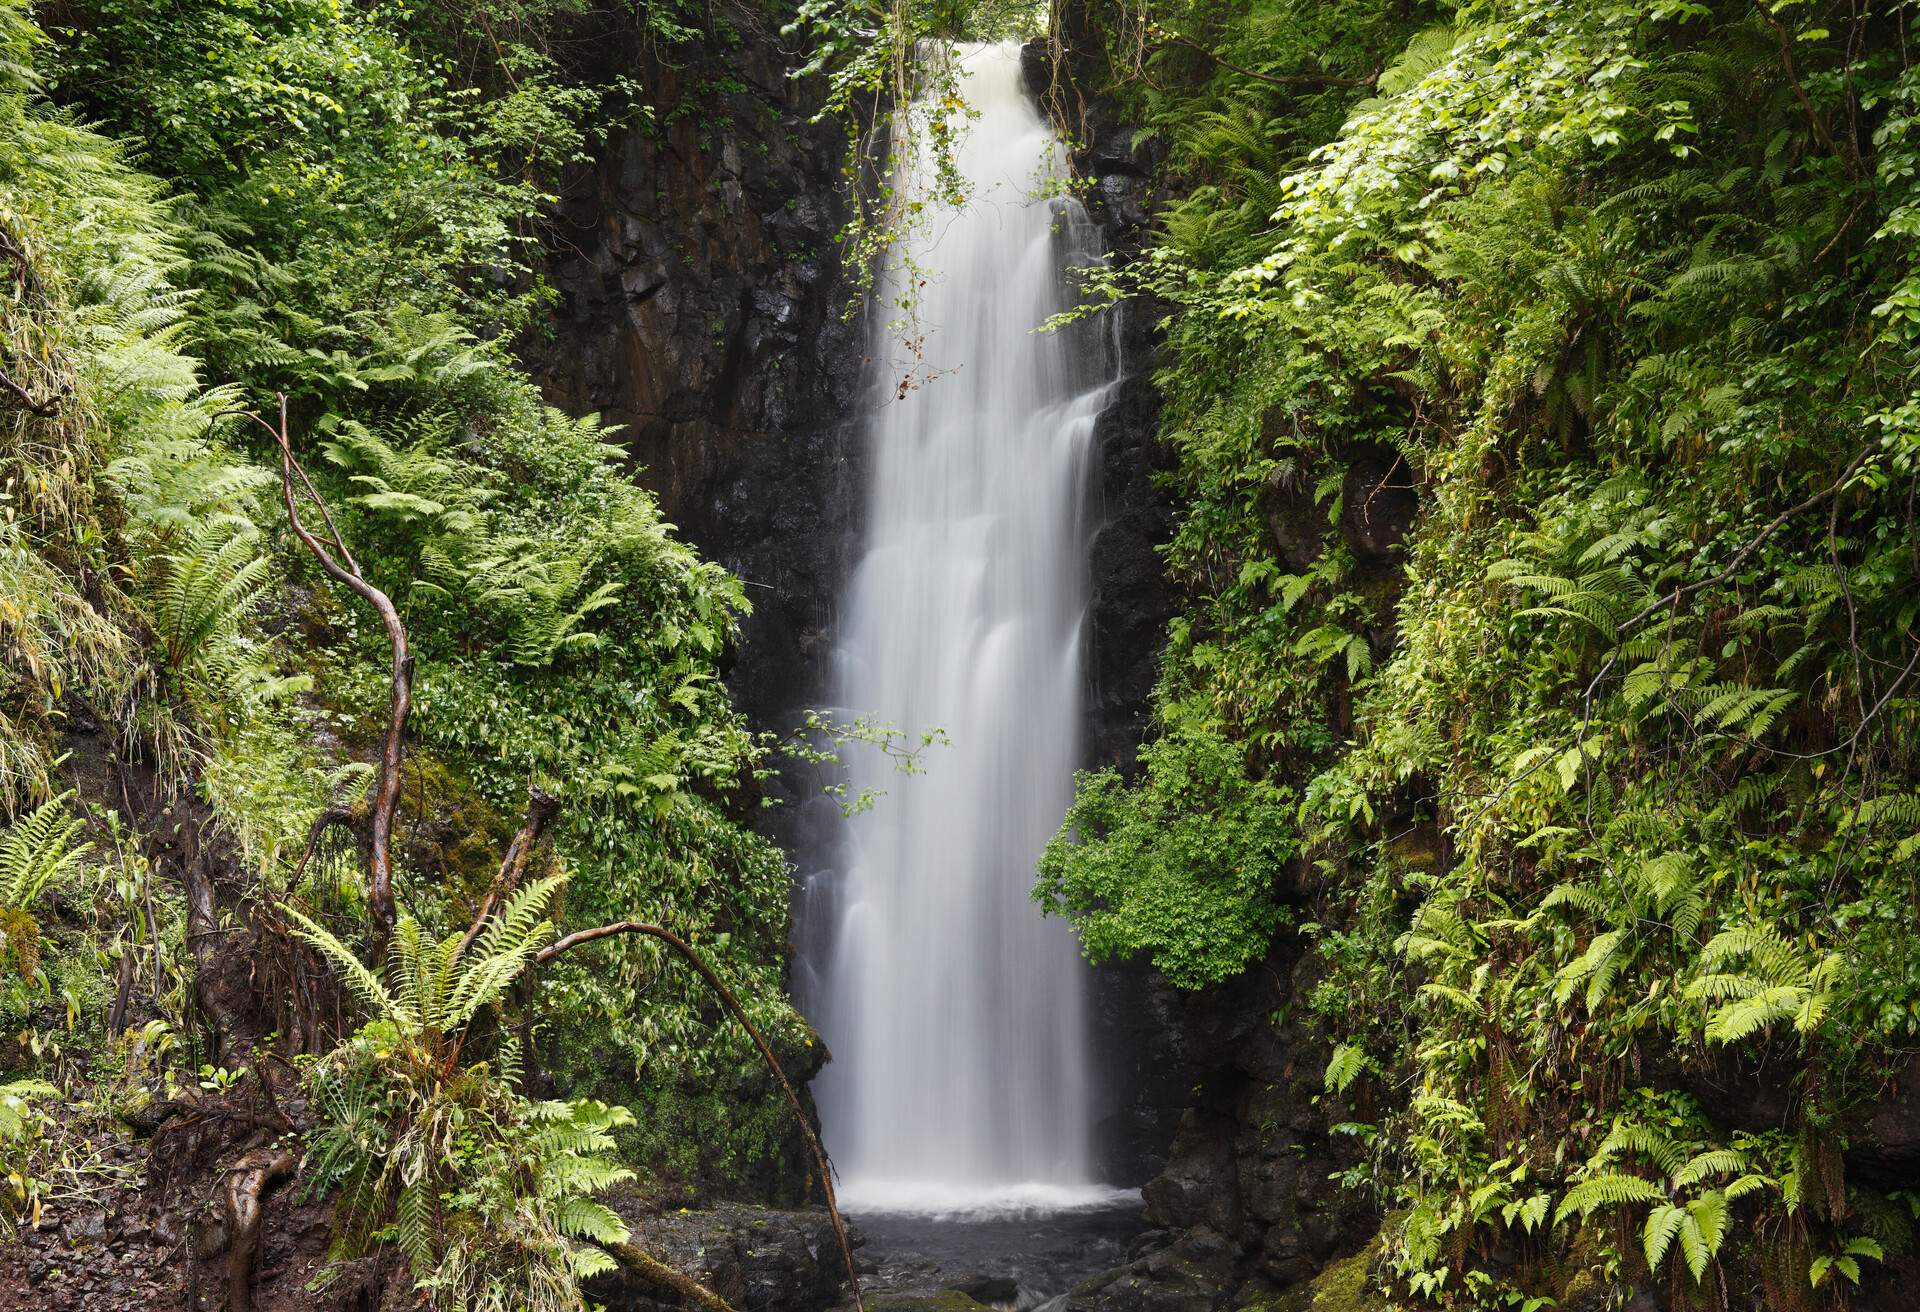 The waterfall Cranny Falls near Carnlough, County Antrim, Northern Ireland